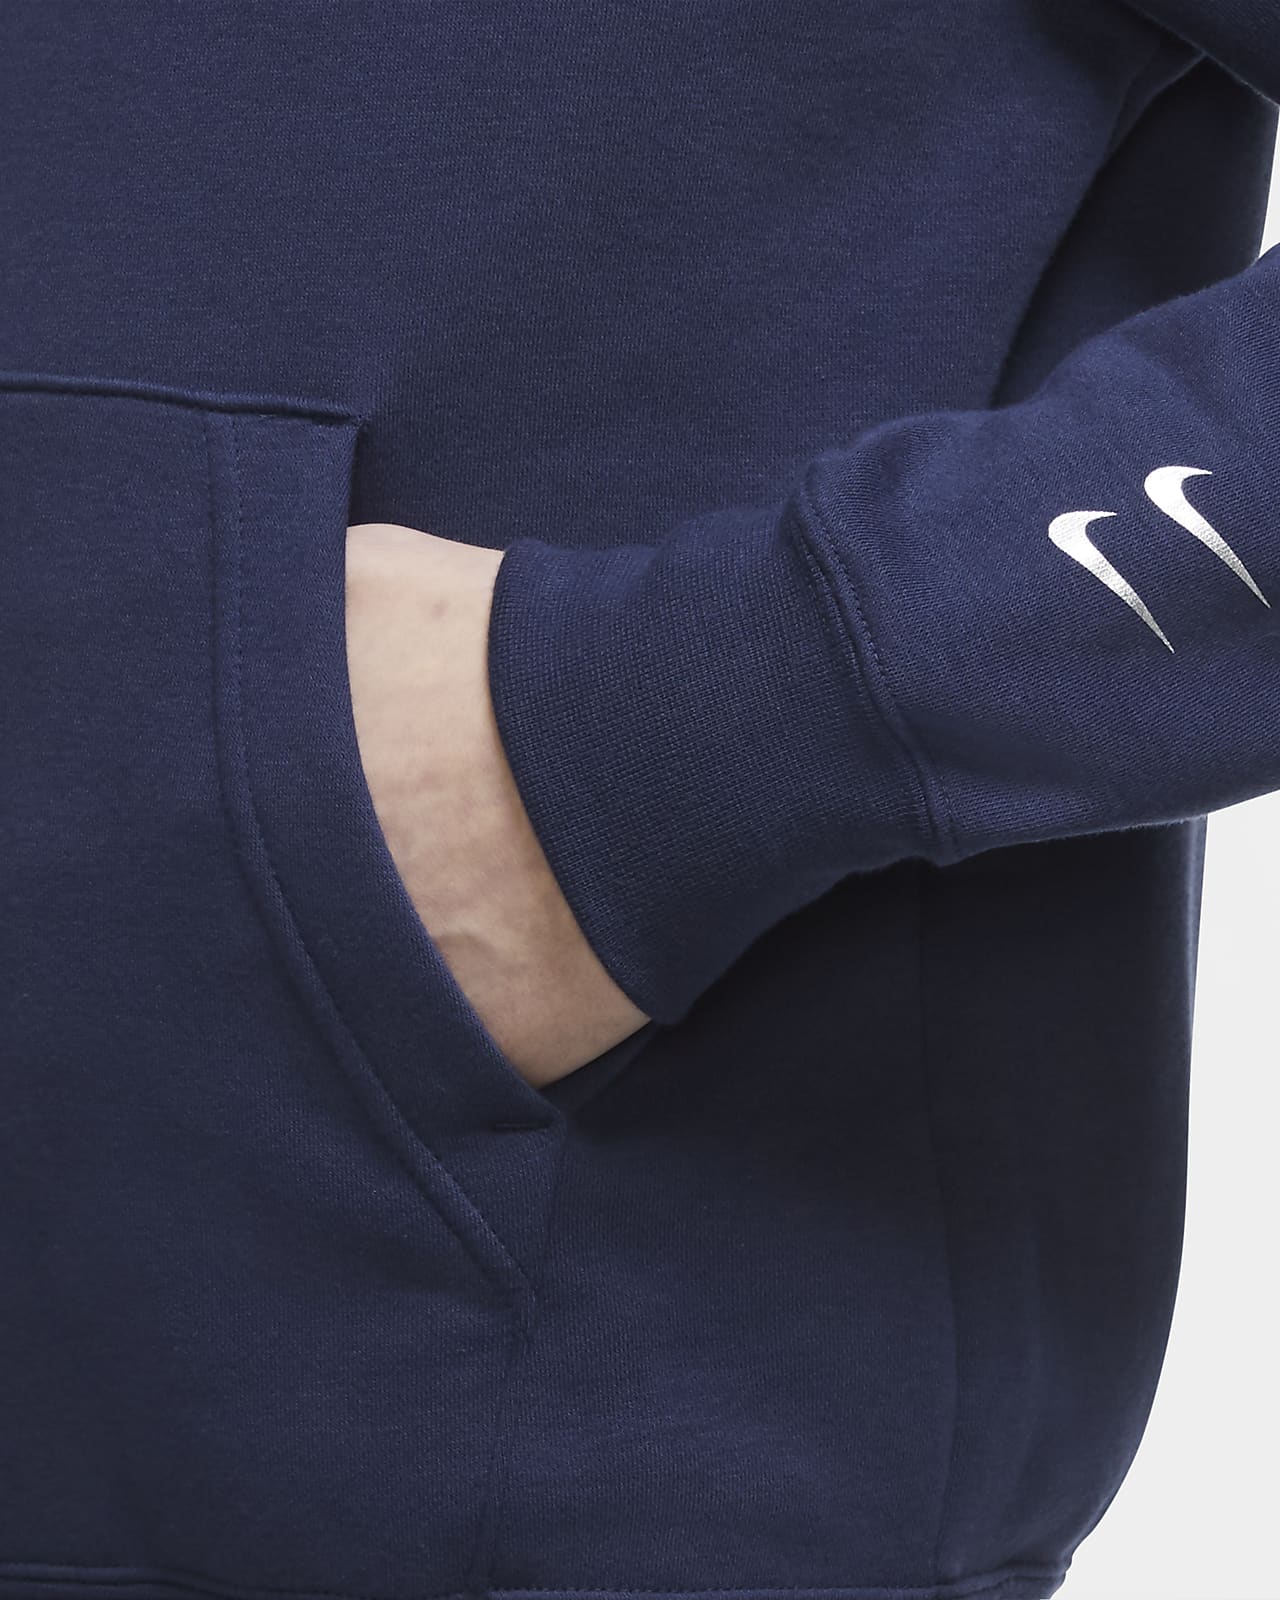 nike double swoosh pullover